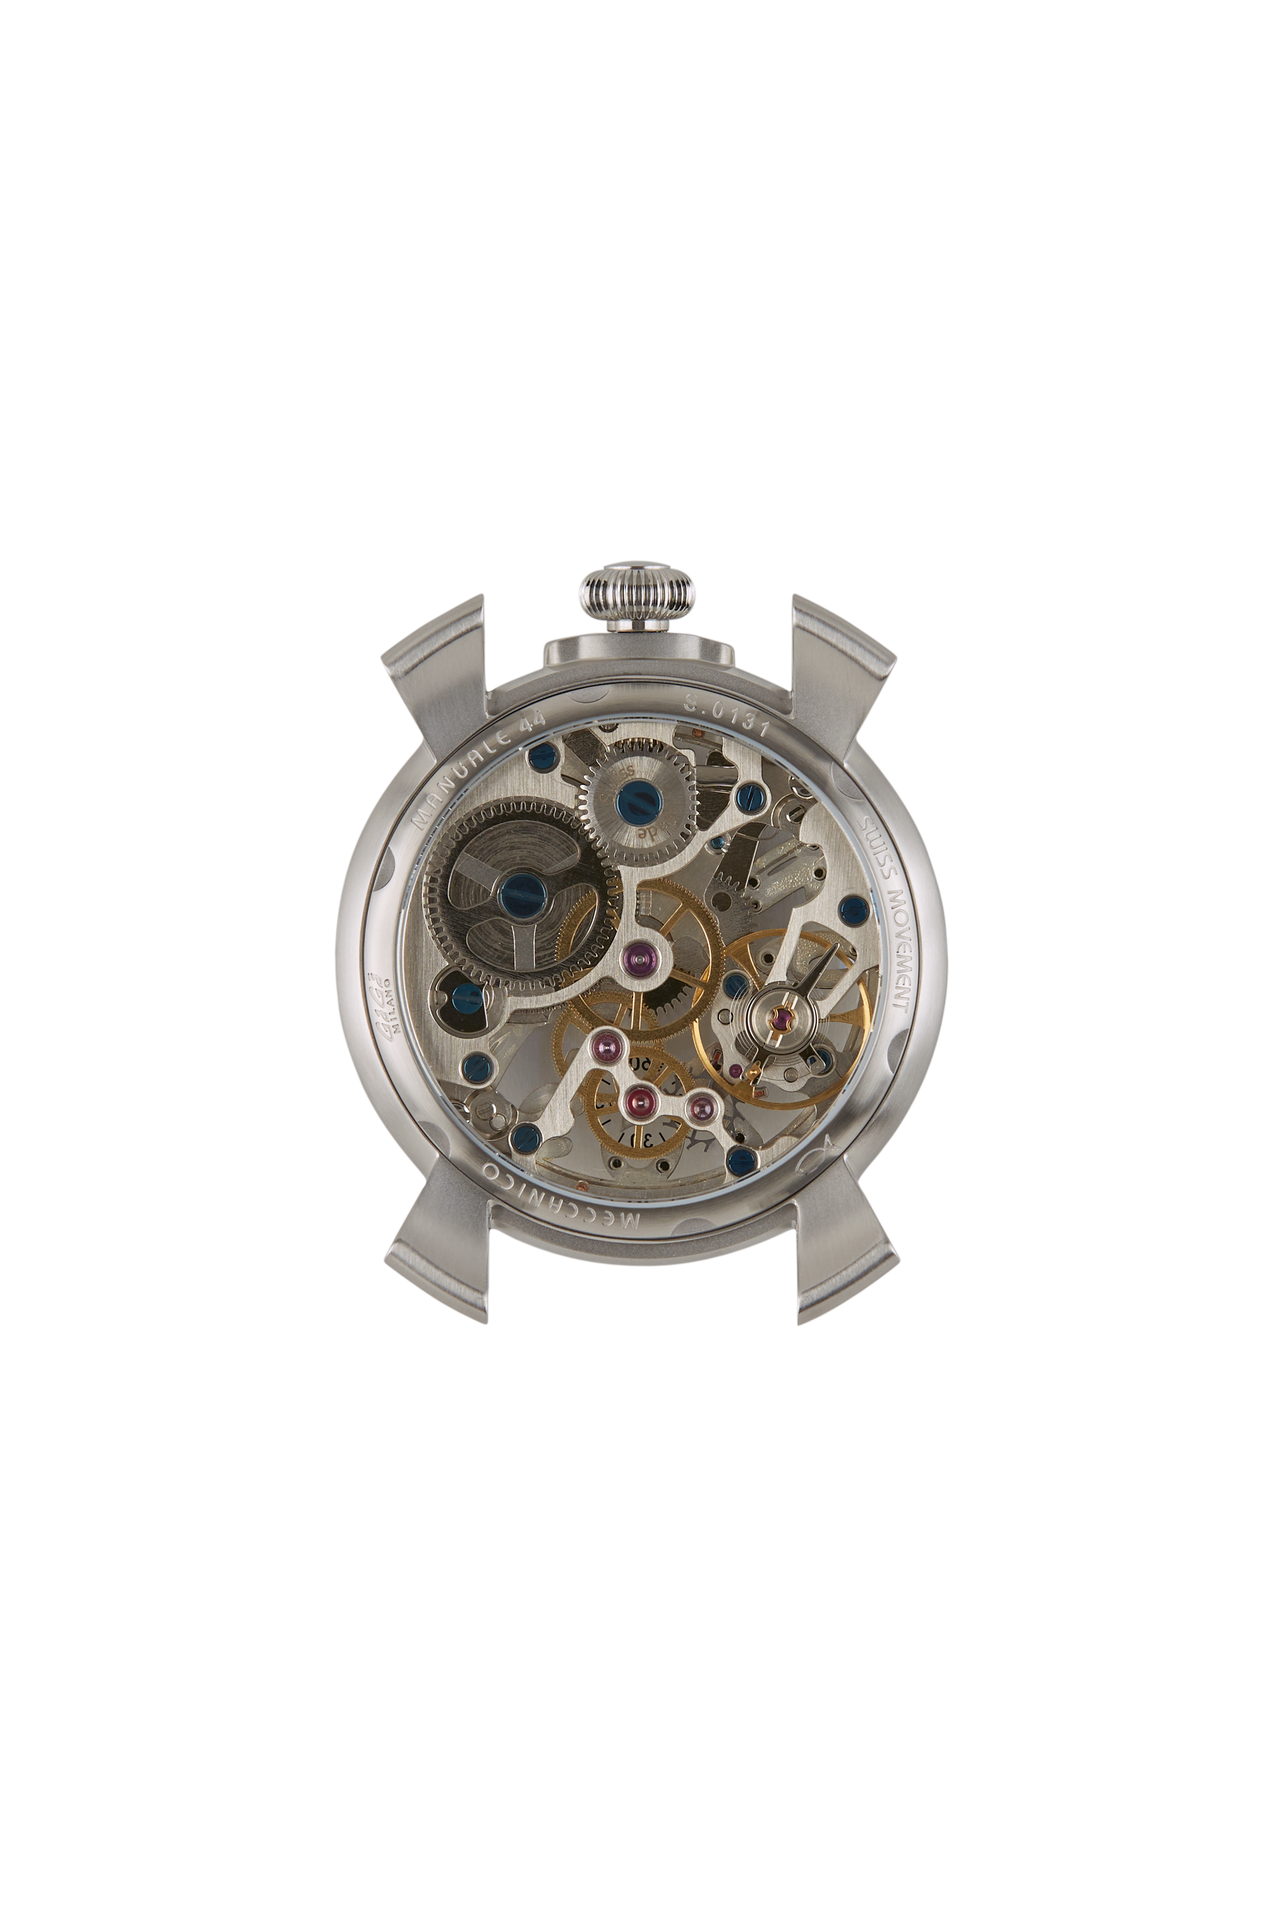 GaGà Milano Watch Manuale Forty-Four 44mm Skeleton Steel